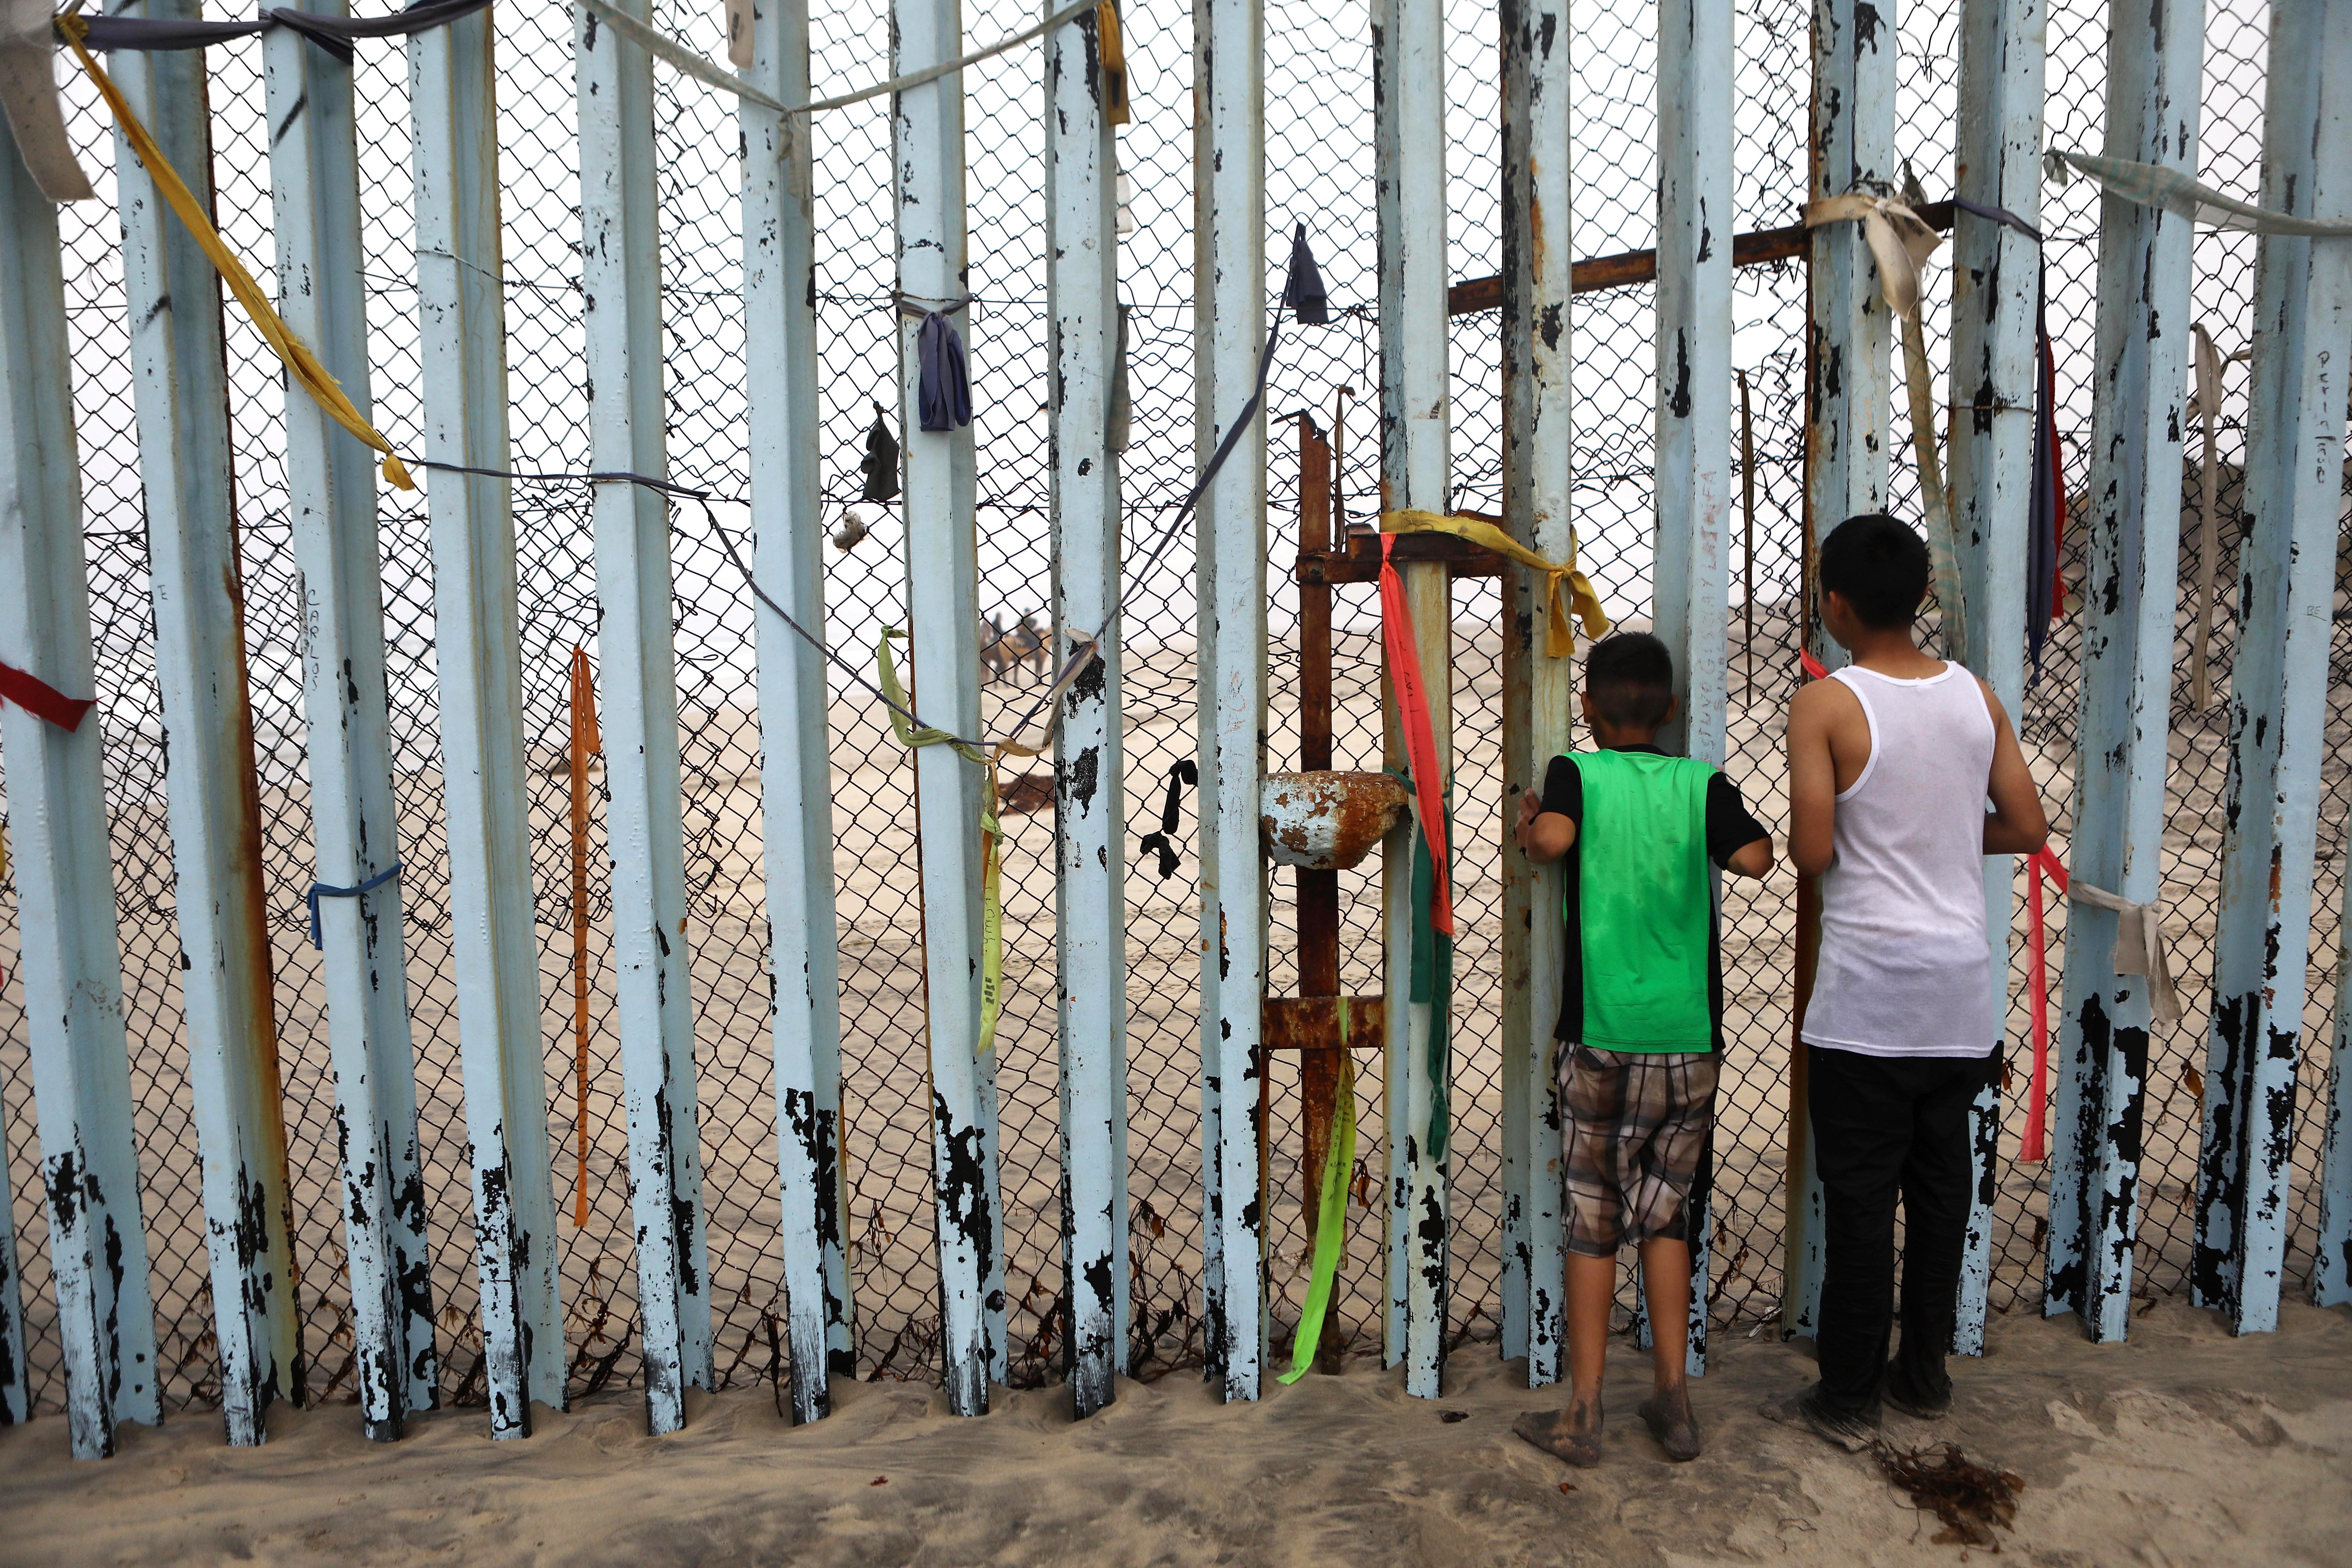 Children at the border fence with Mexico.